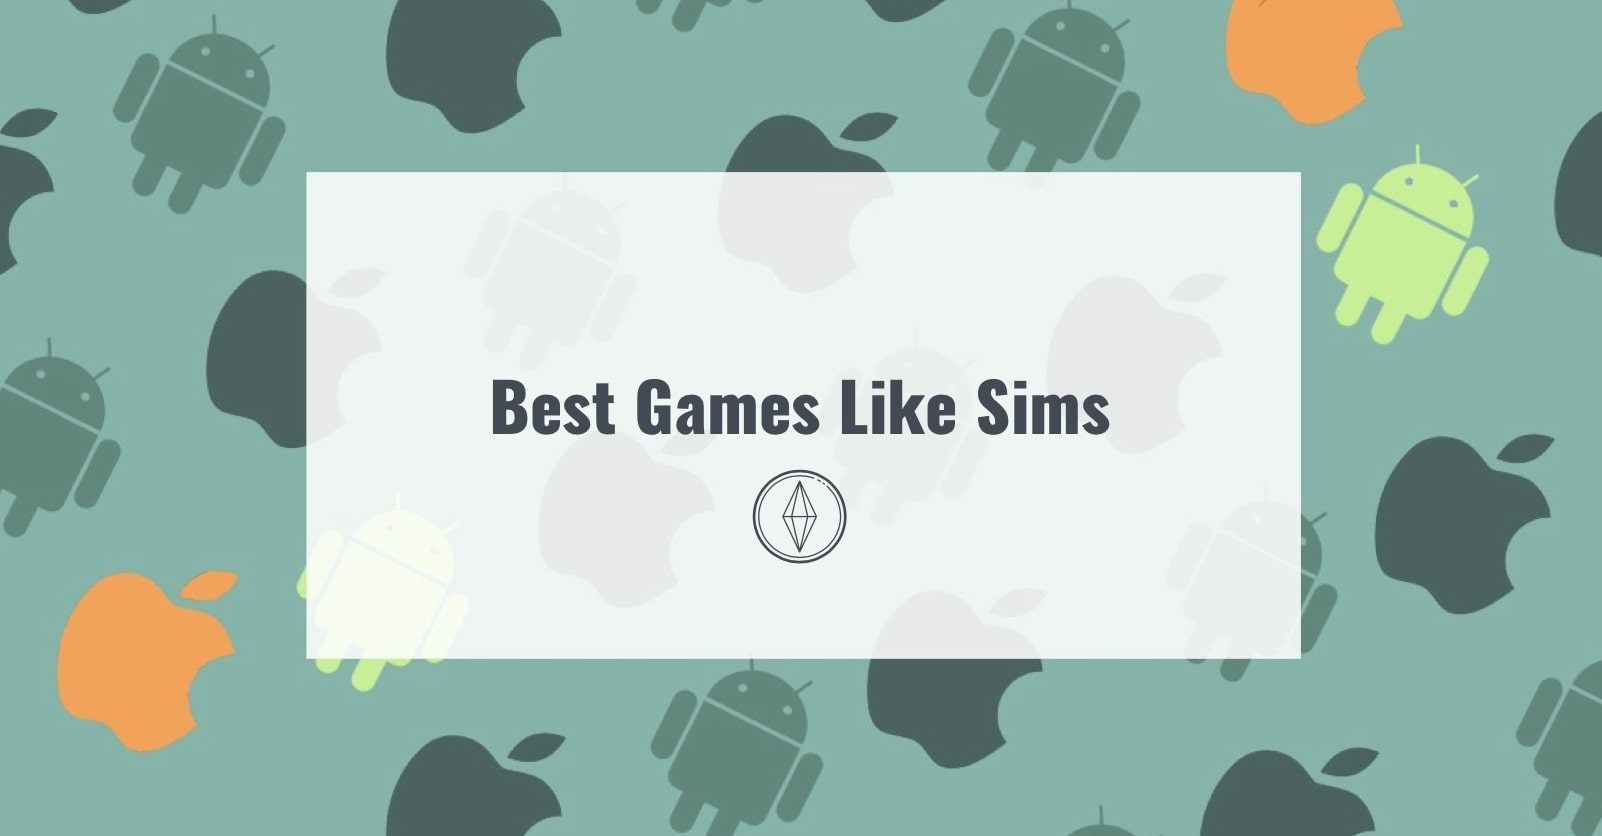 Best Games Like Sims